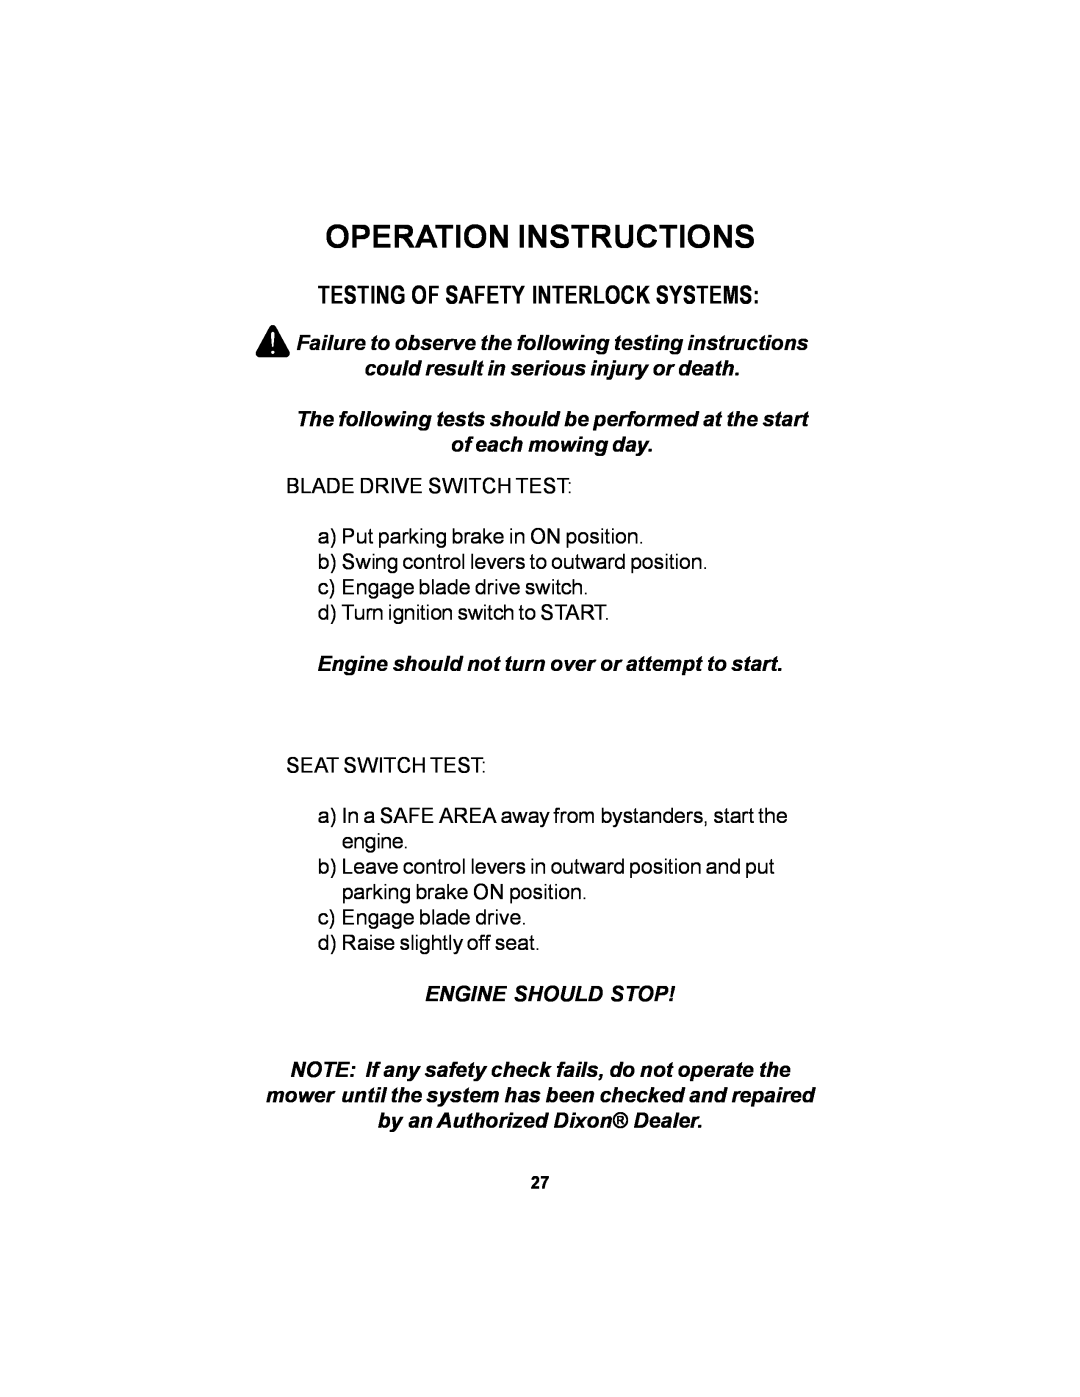 Dixon 36 manual Operation Instructions, Testing Of Safety Interlock Systems 